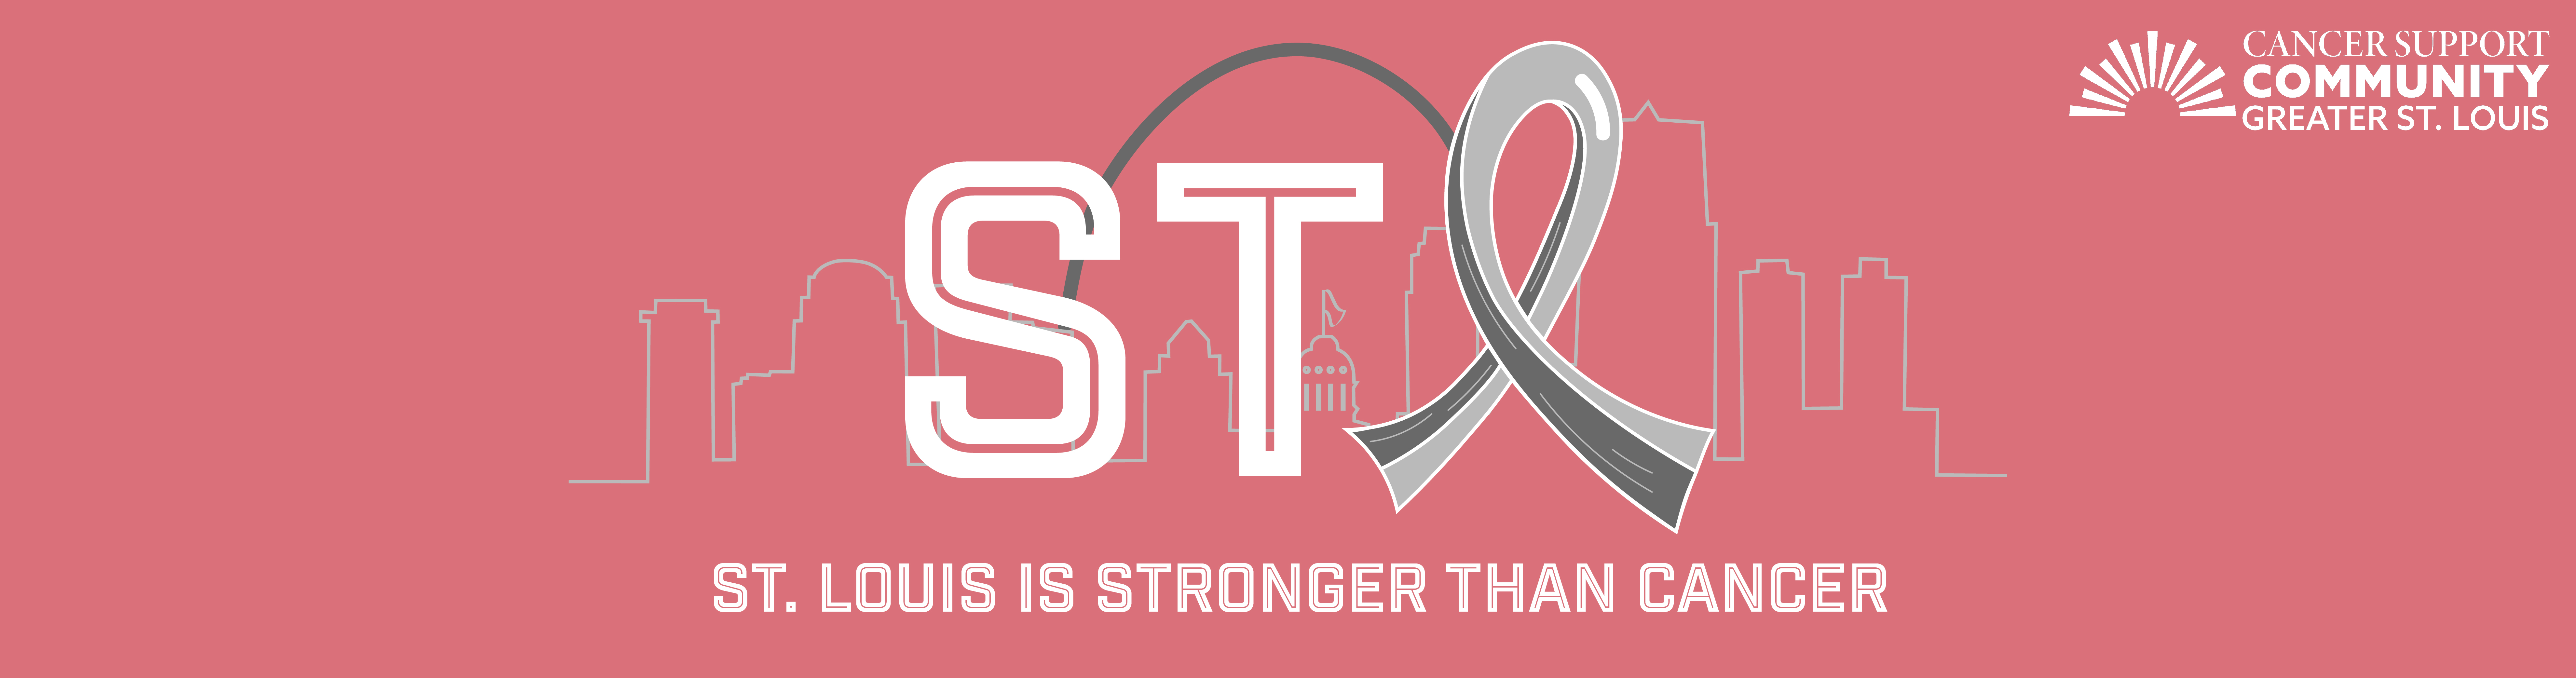 St. Louis is Stronger than Cancer